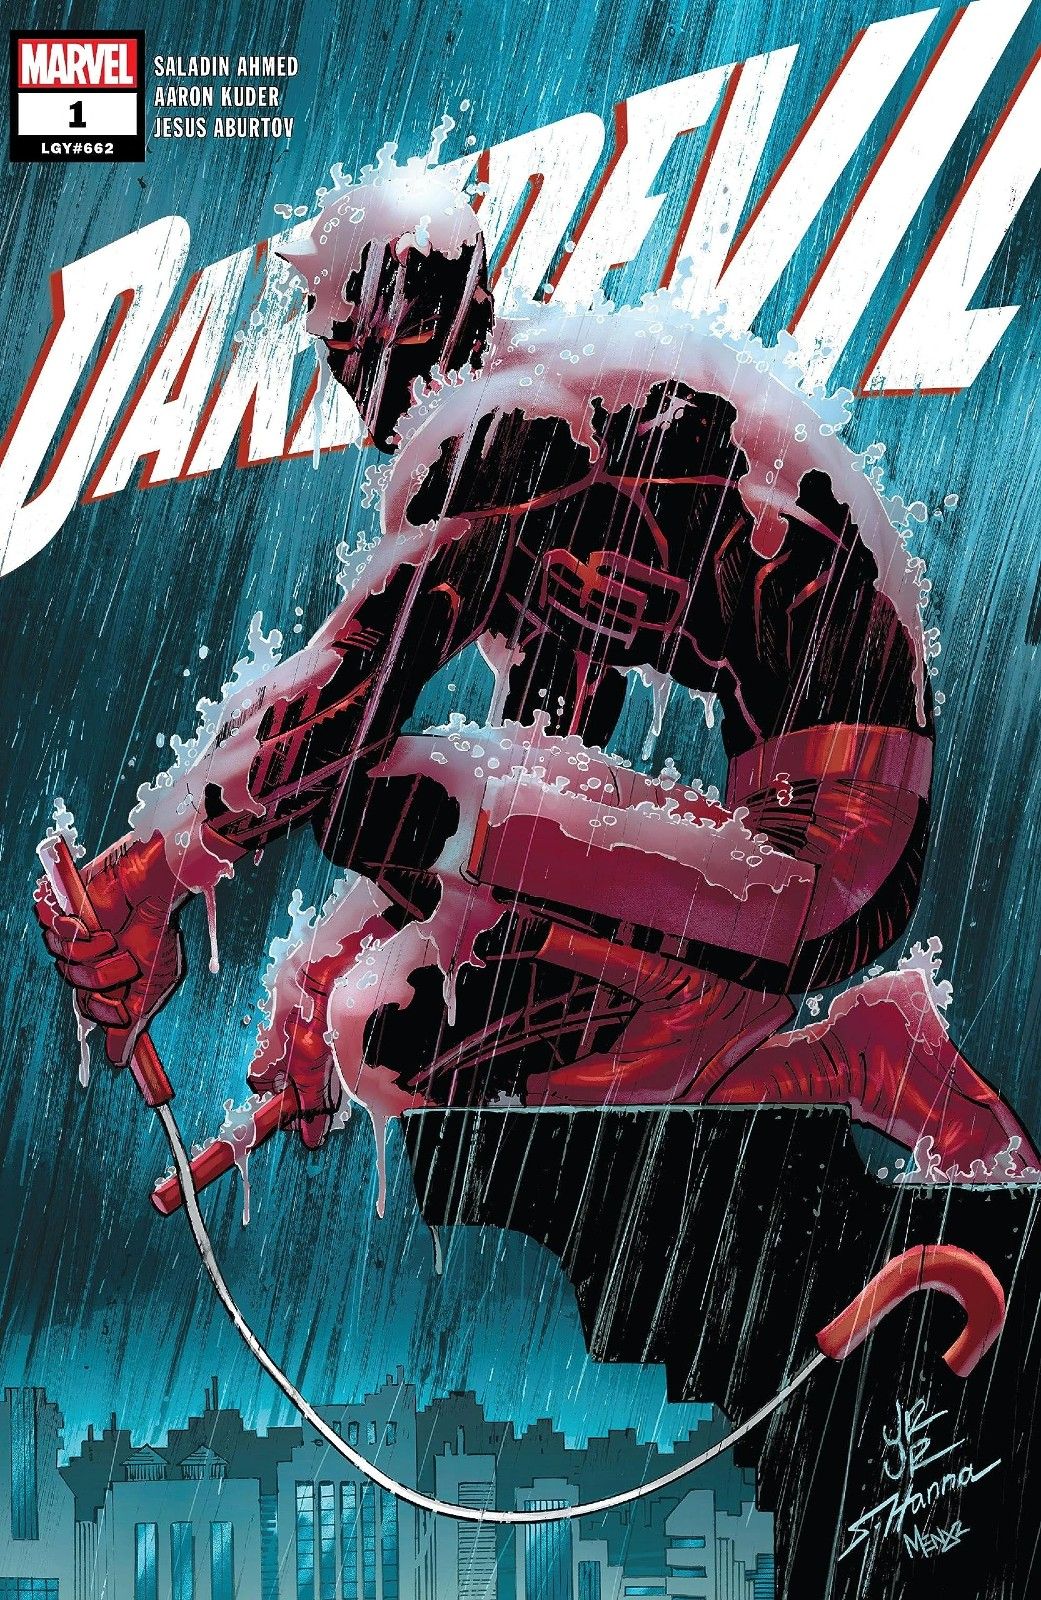 Daredevil is perched on the edge of a building in the rain in Daredevil (Vol. 8) #1 by Marvel Comics